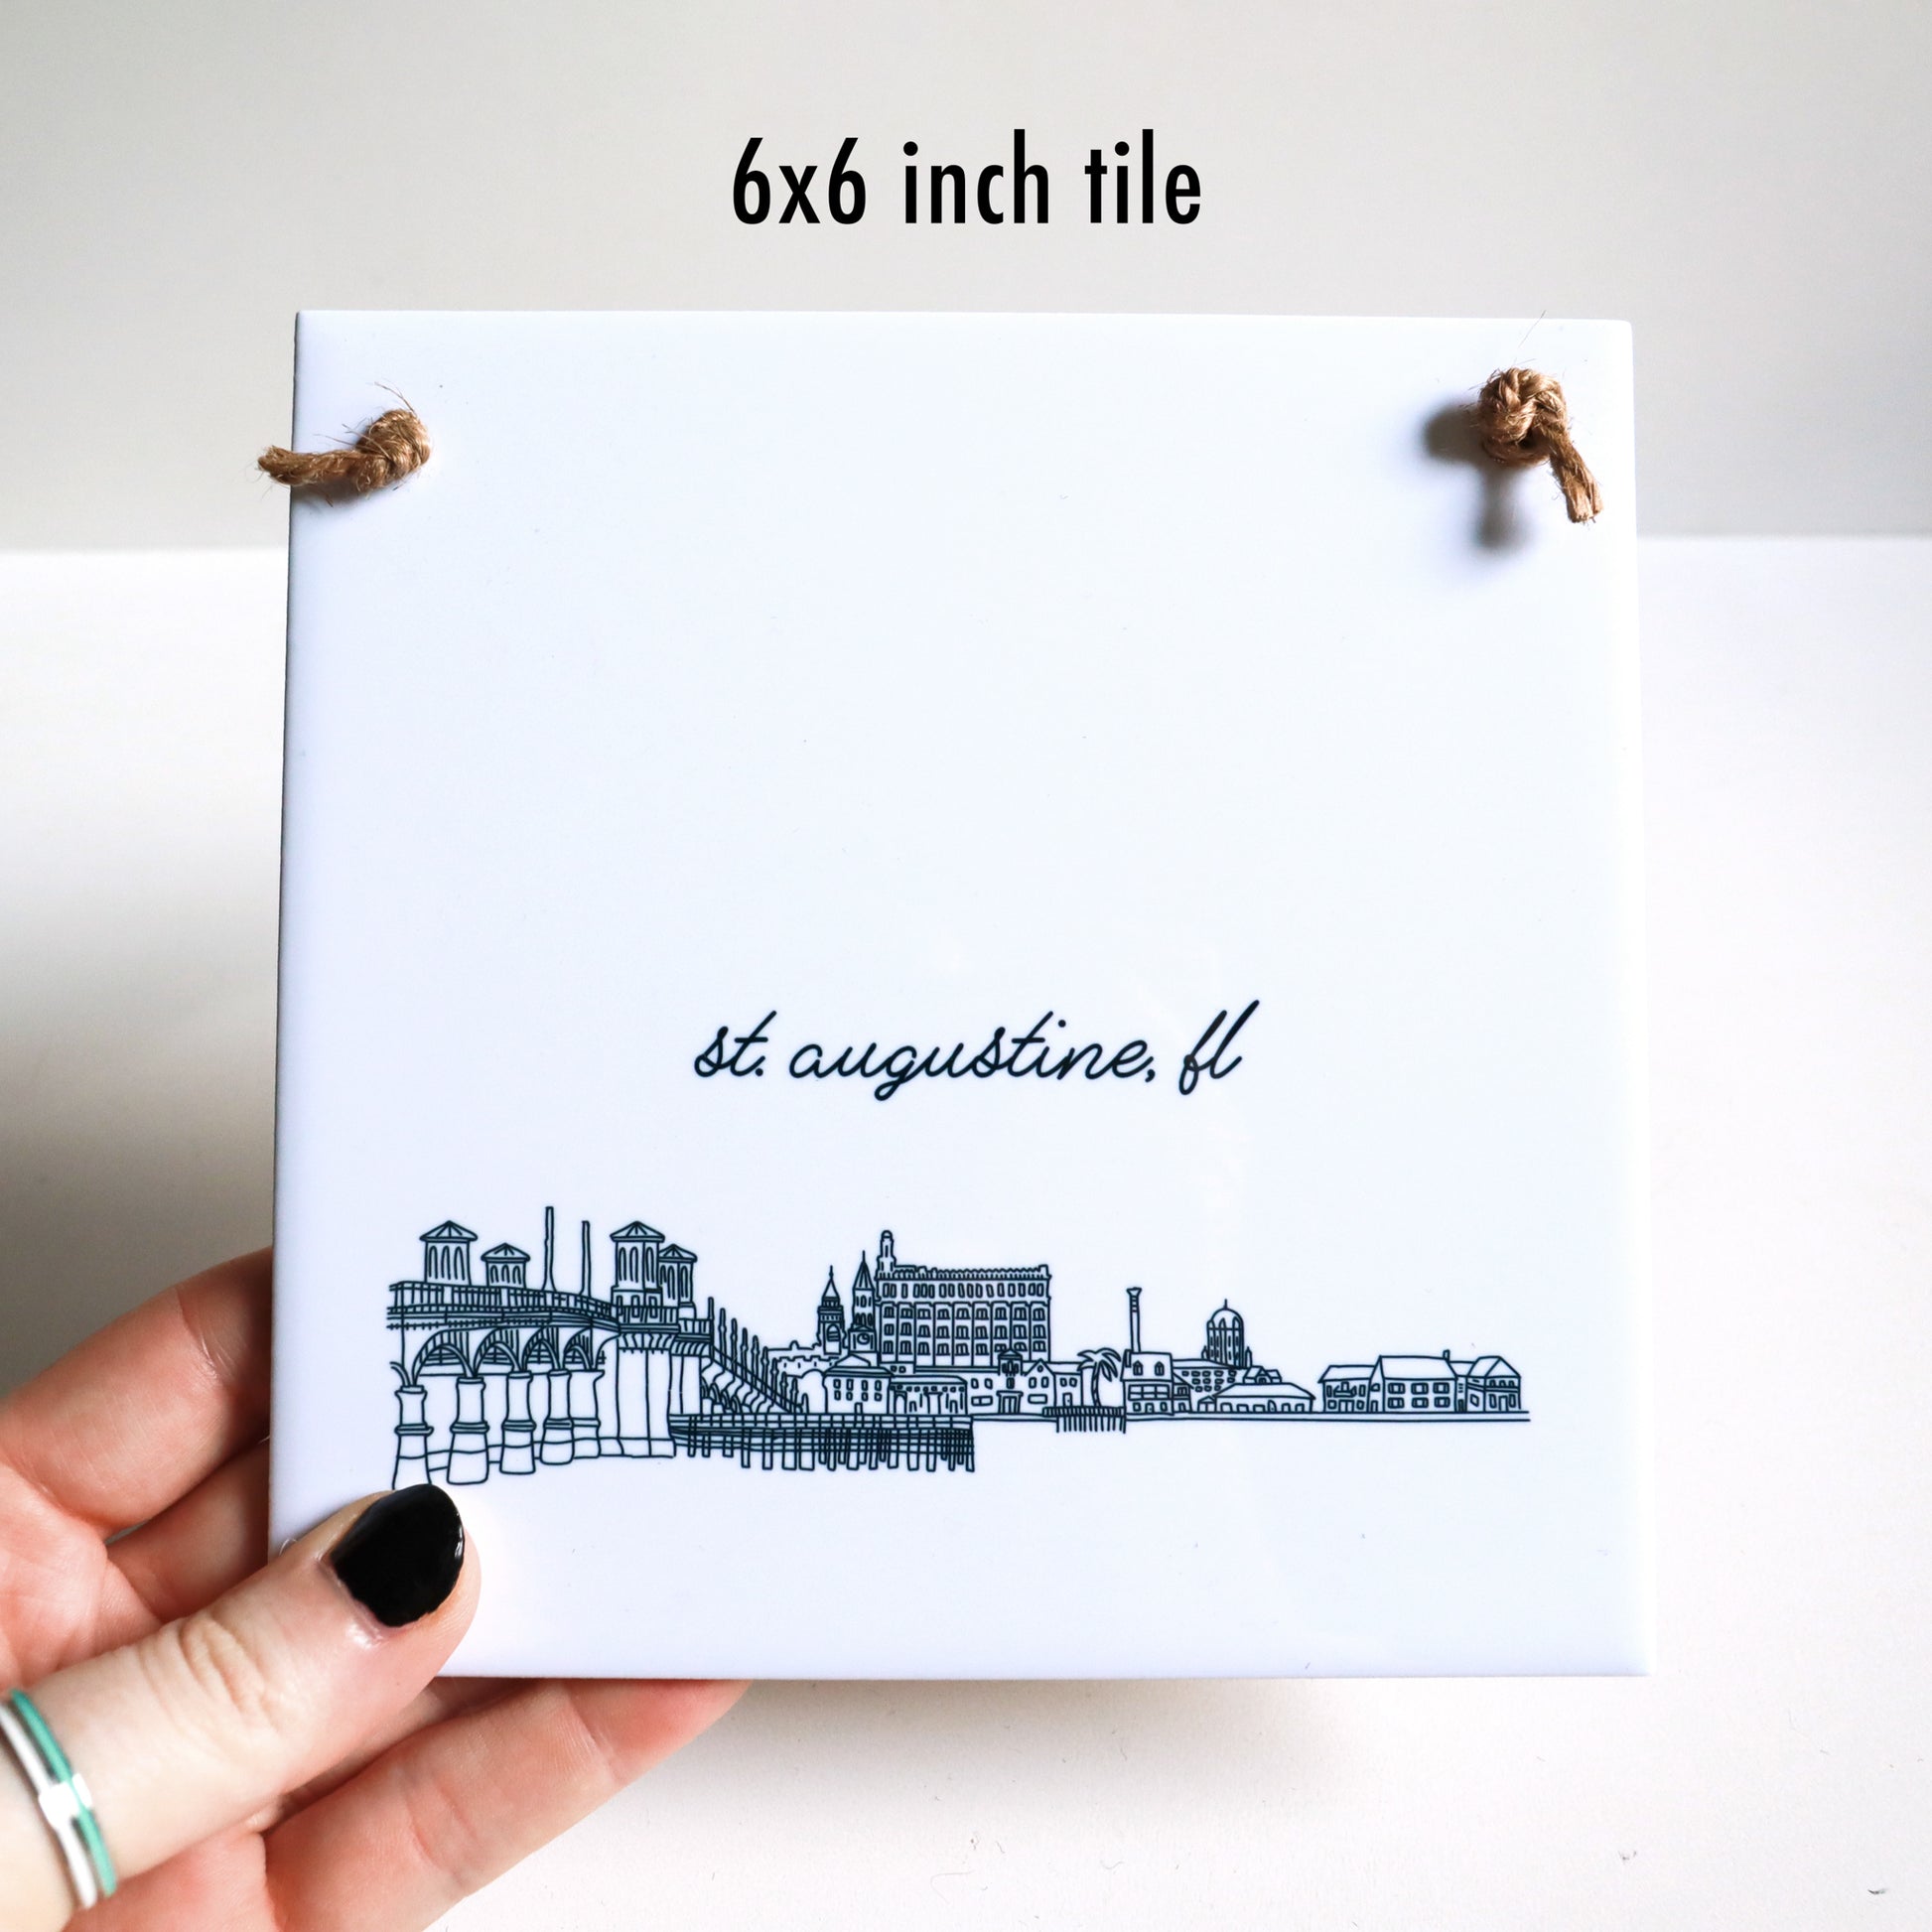 A hand holding a city drawing on a square tile sign, showing the 6x6 inch ceramic tile